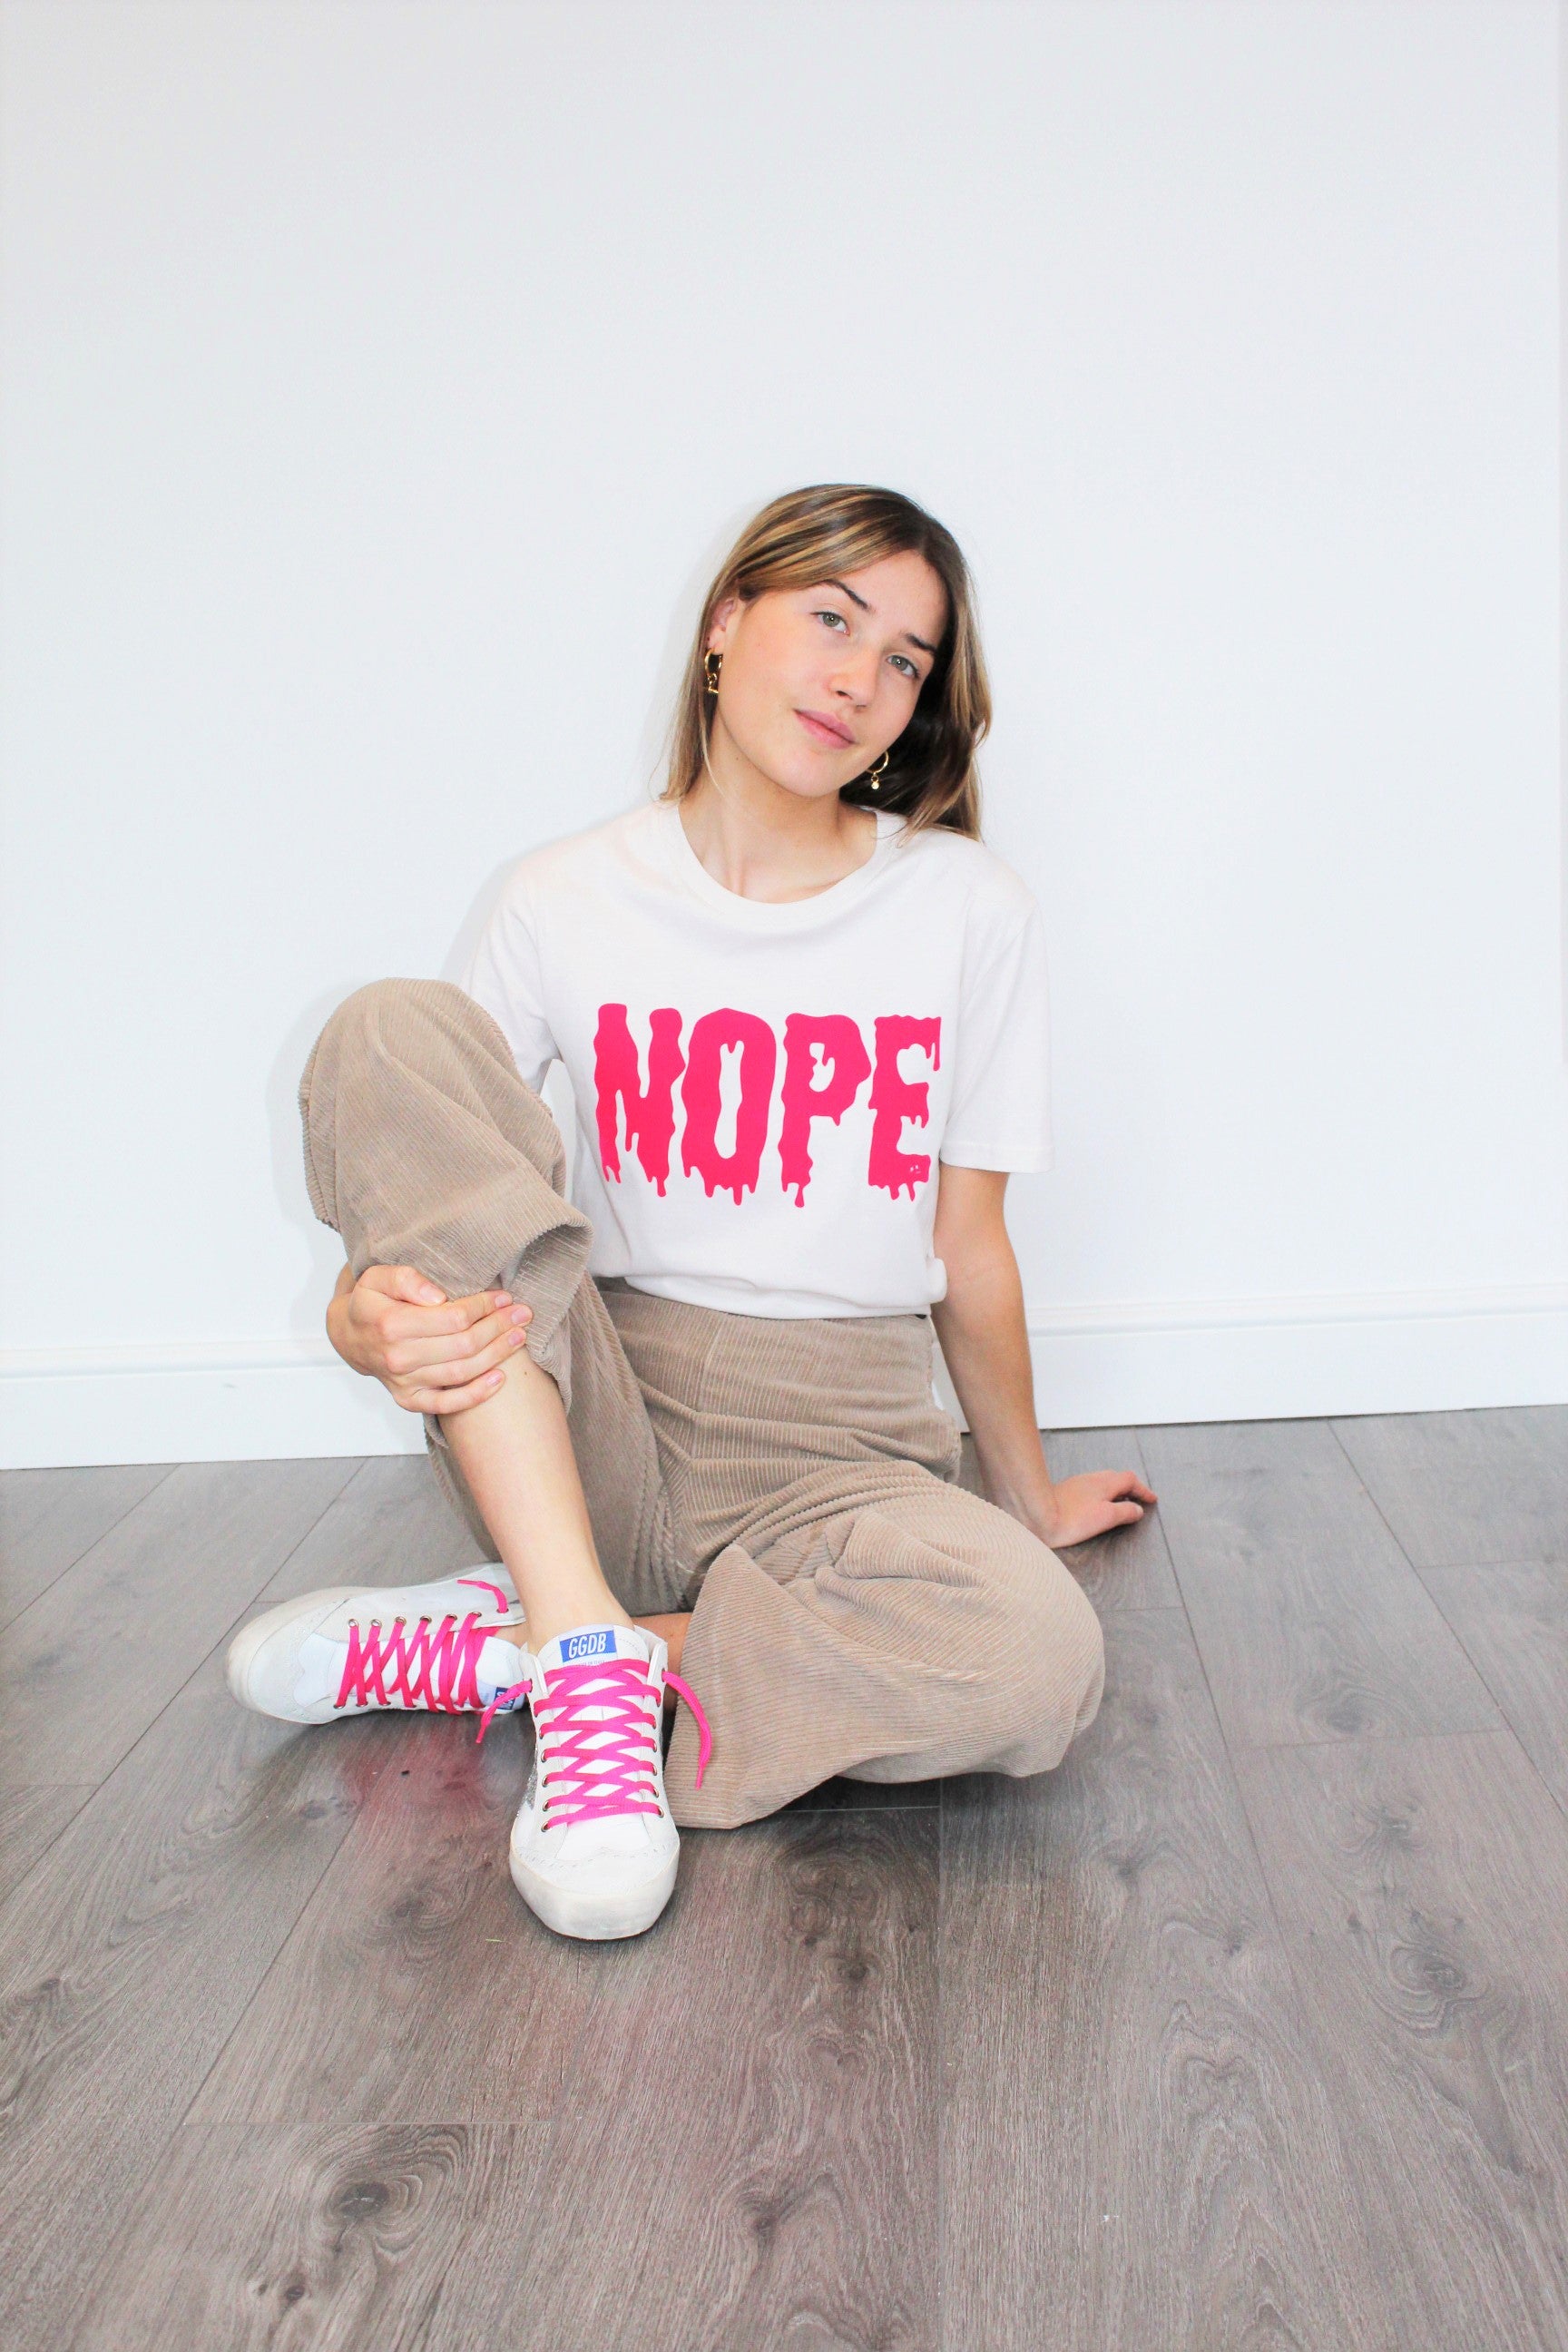 BS Nope Tee in Neon Pink and Vintage White